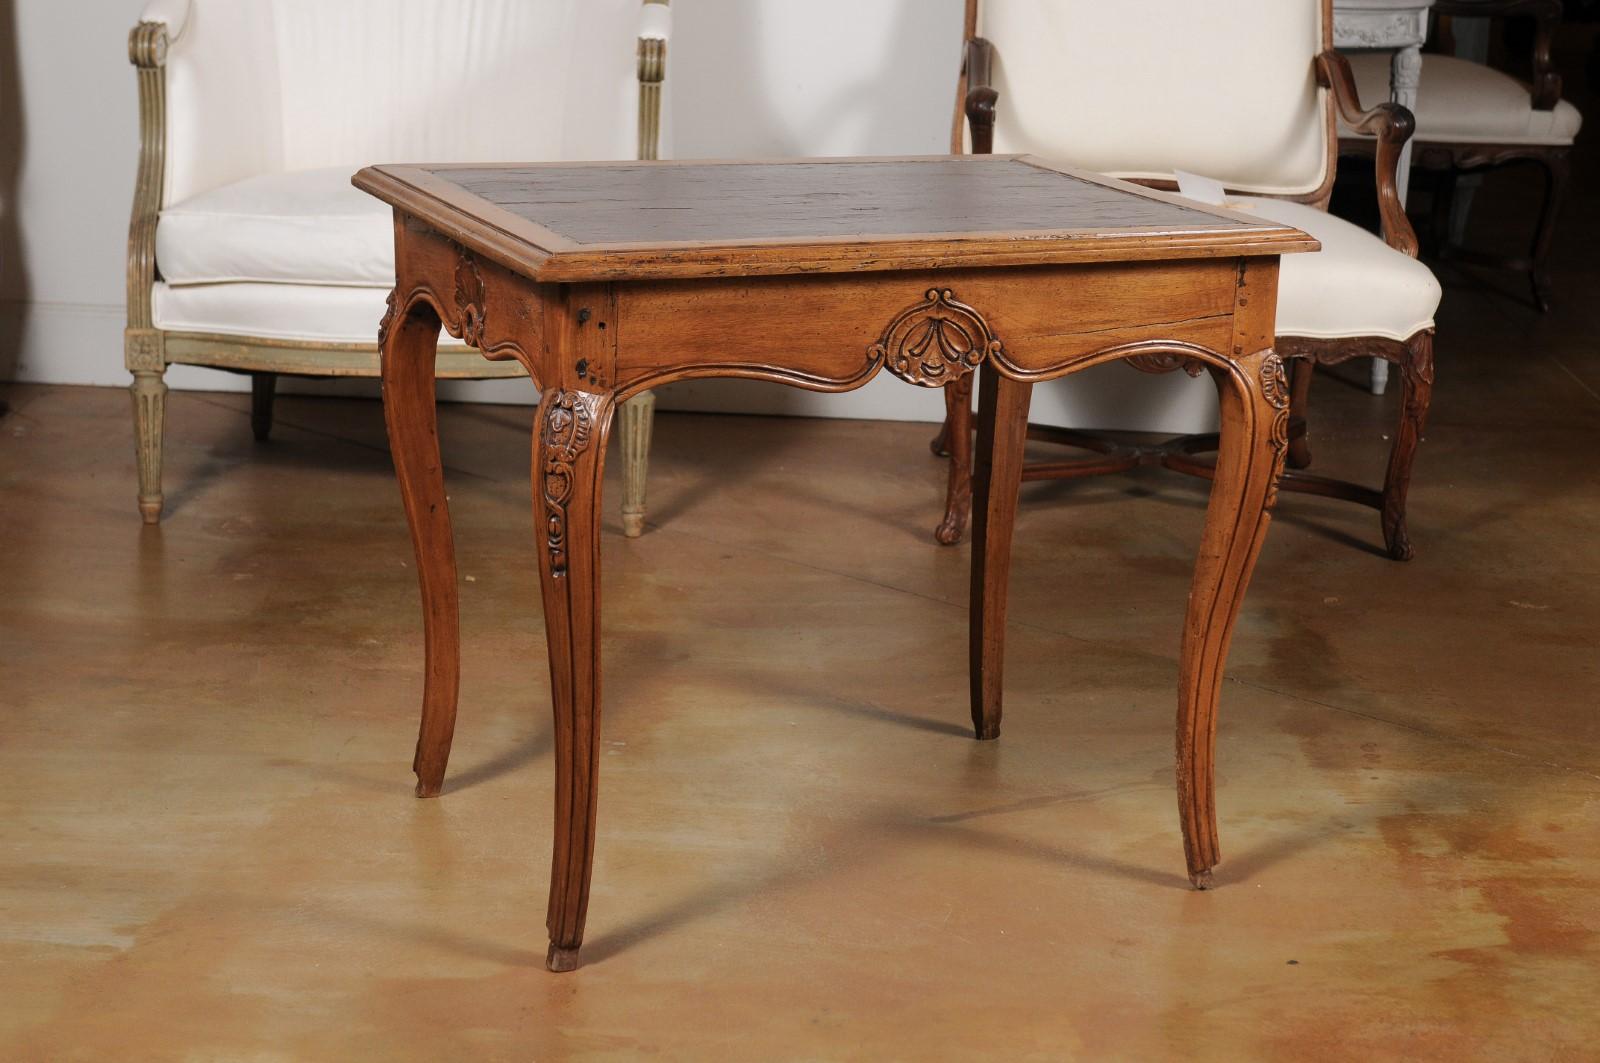 A French Louis XV style carved walnut side table from the 19th century, with leather top and cabriole legs. Born in France during the politically dynamic 19th century, this walnut table features a rectangular top with beveled edges and leather